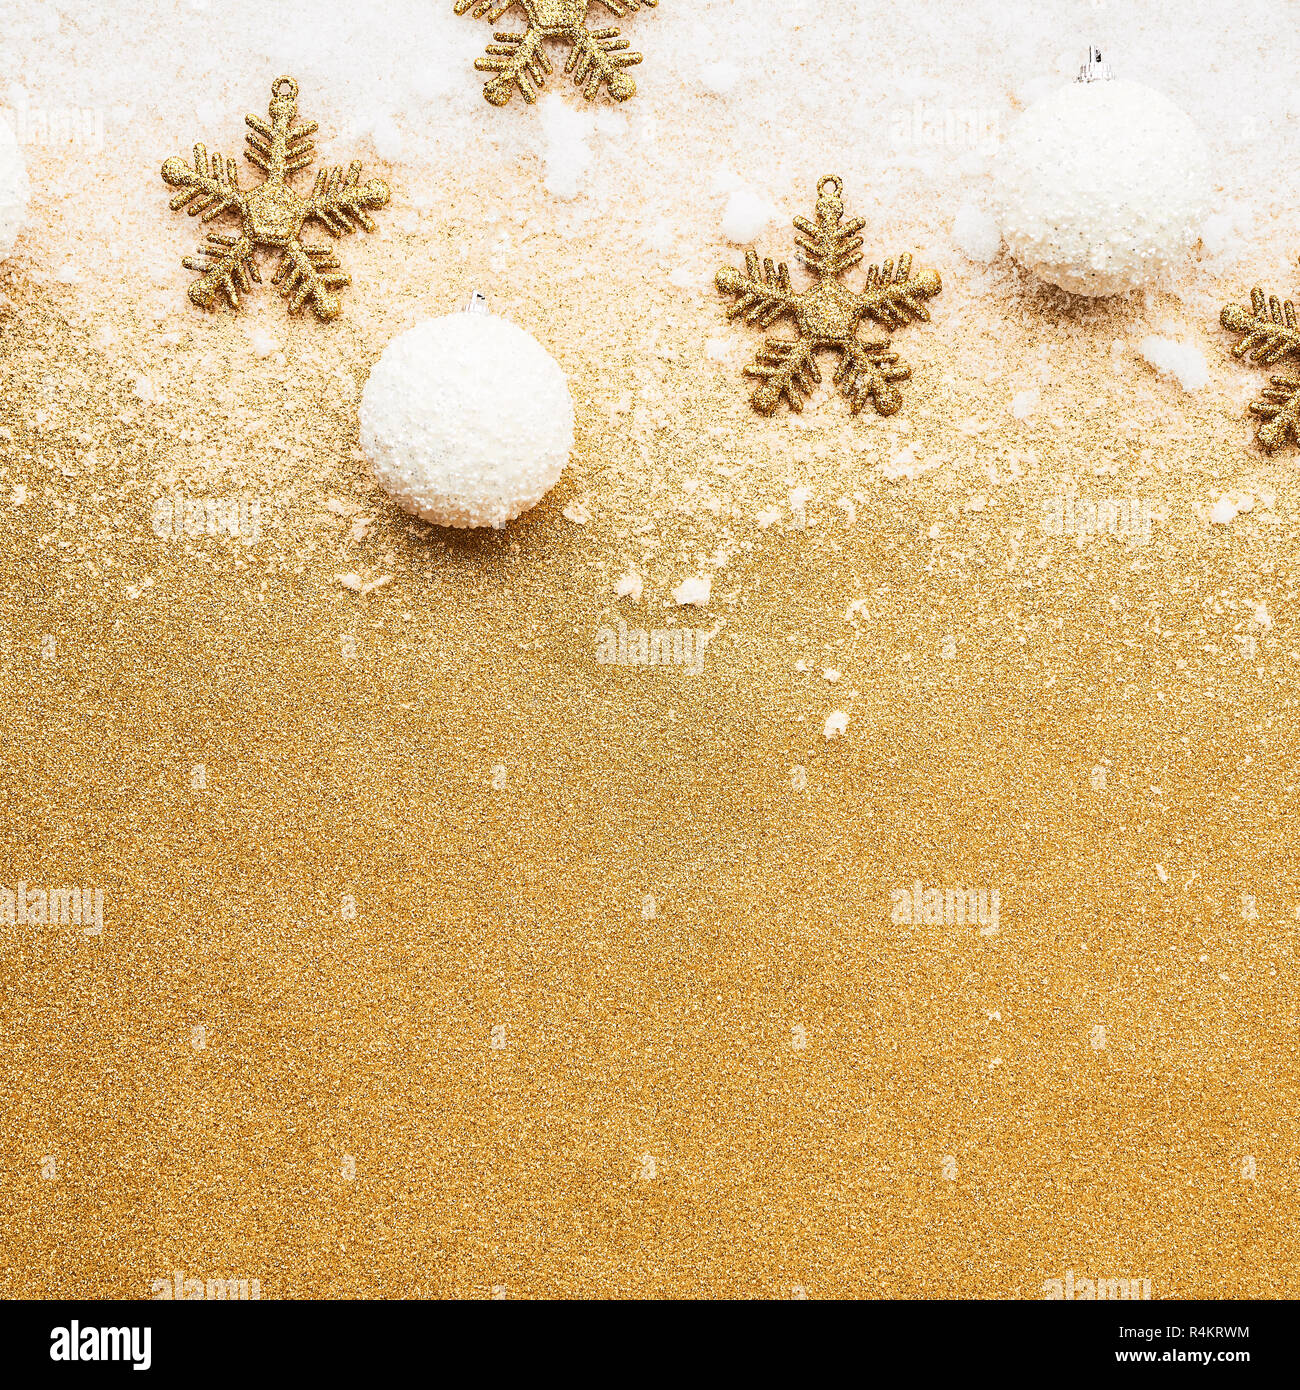 Beautiful christmas silver and white deco baubles with golden snowflake deco over powdery snow on golden glitter background. Flat lay design. Copy Spa Stock Photo